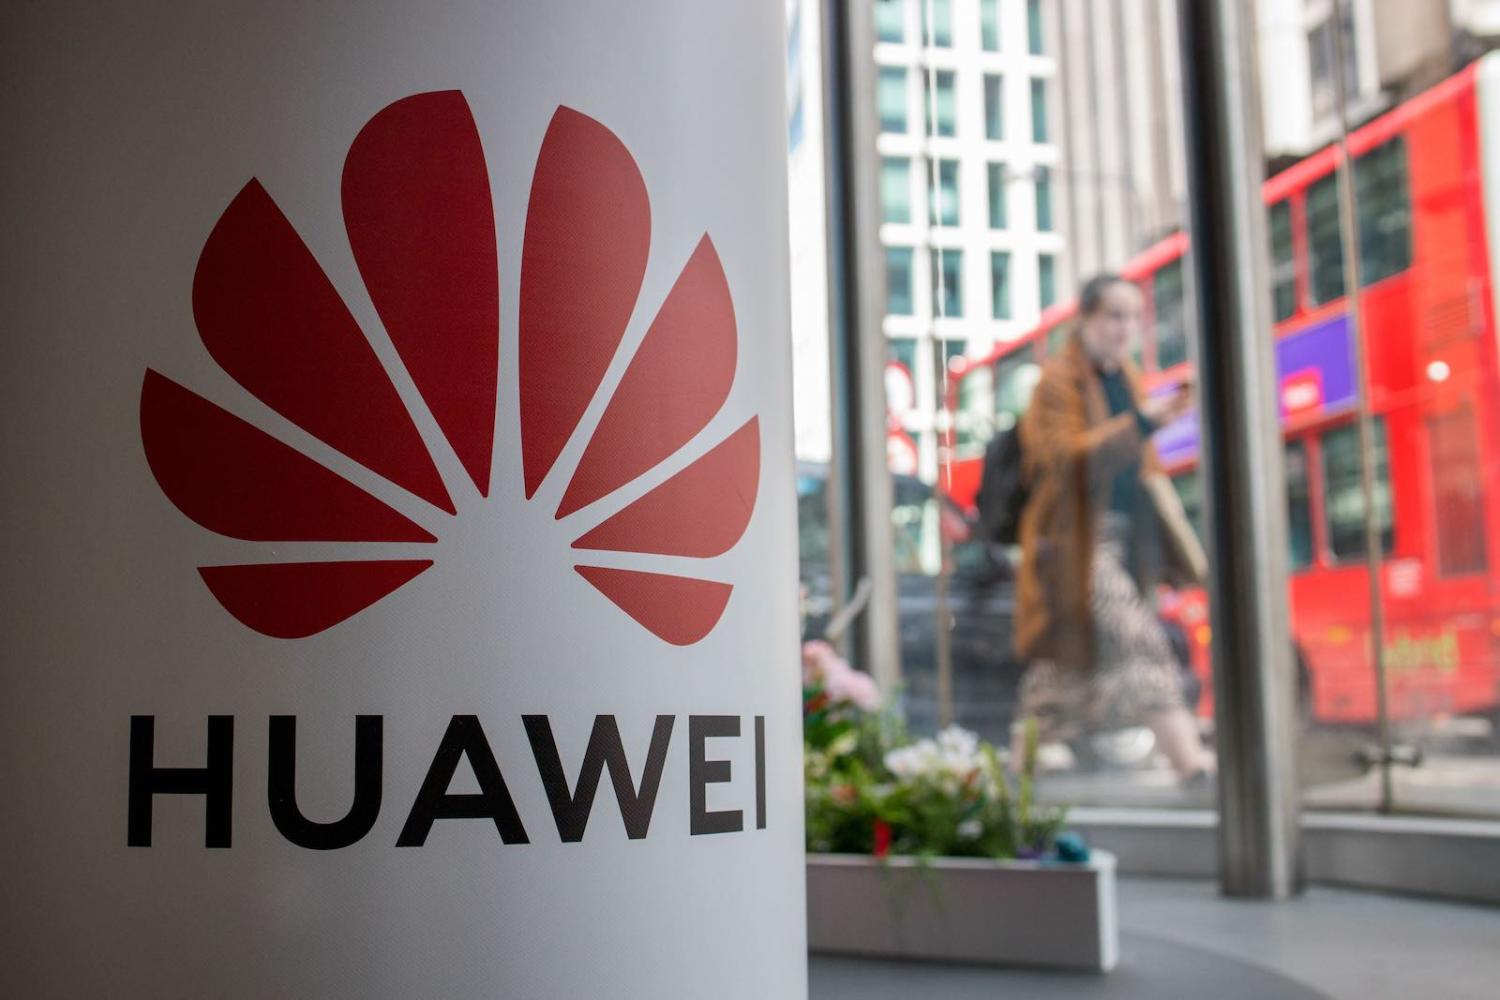 In many ways, the UK has been hedging on the Huawei issue (Photo: Tolga Akmen via Getty)